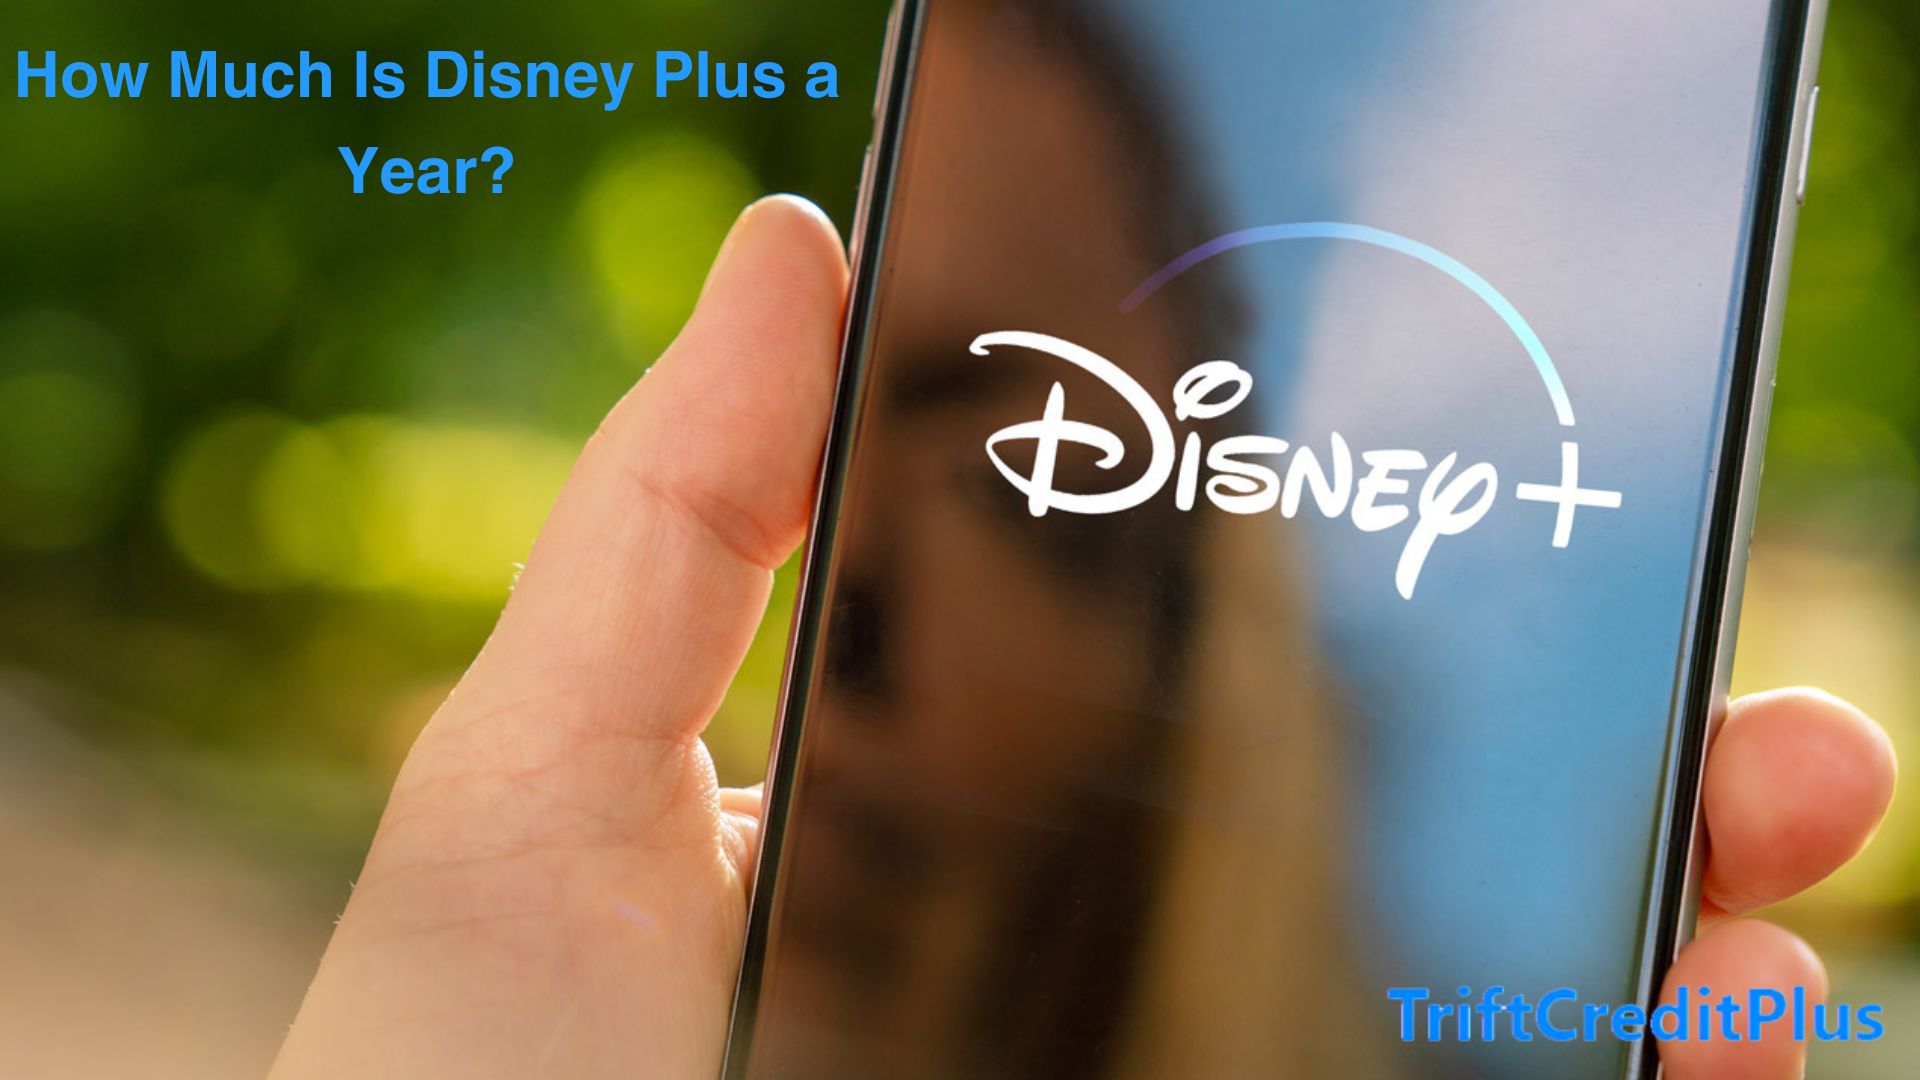 How much is Disney Plus a year?